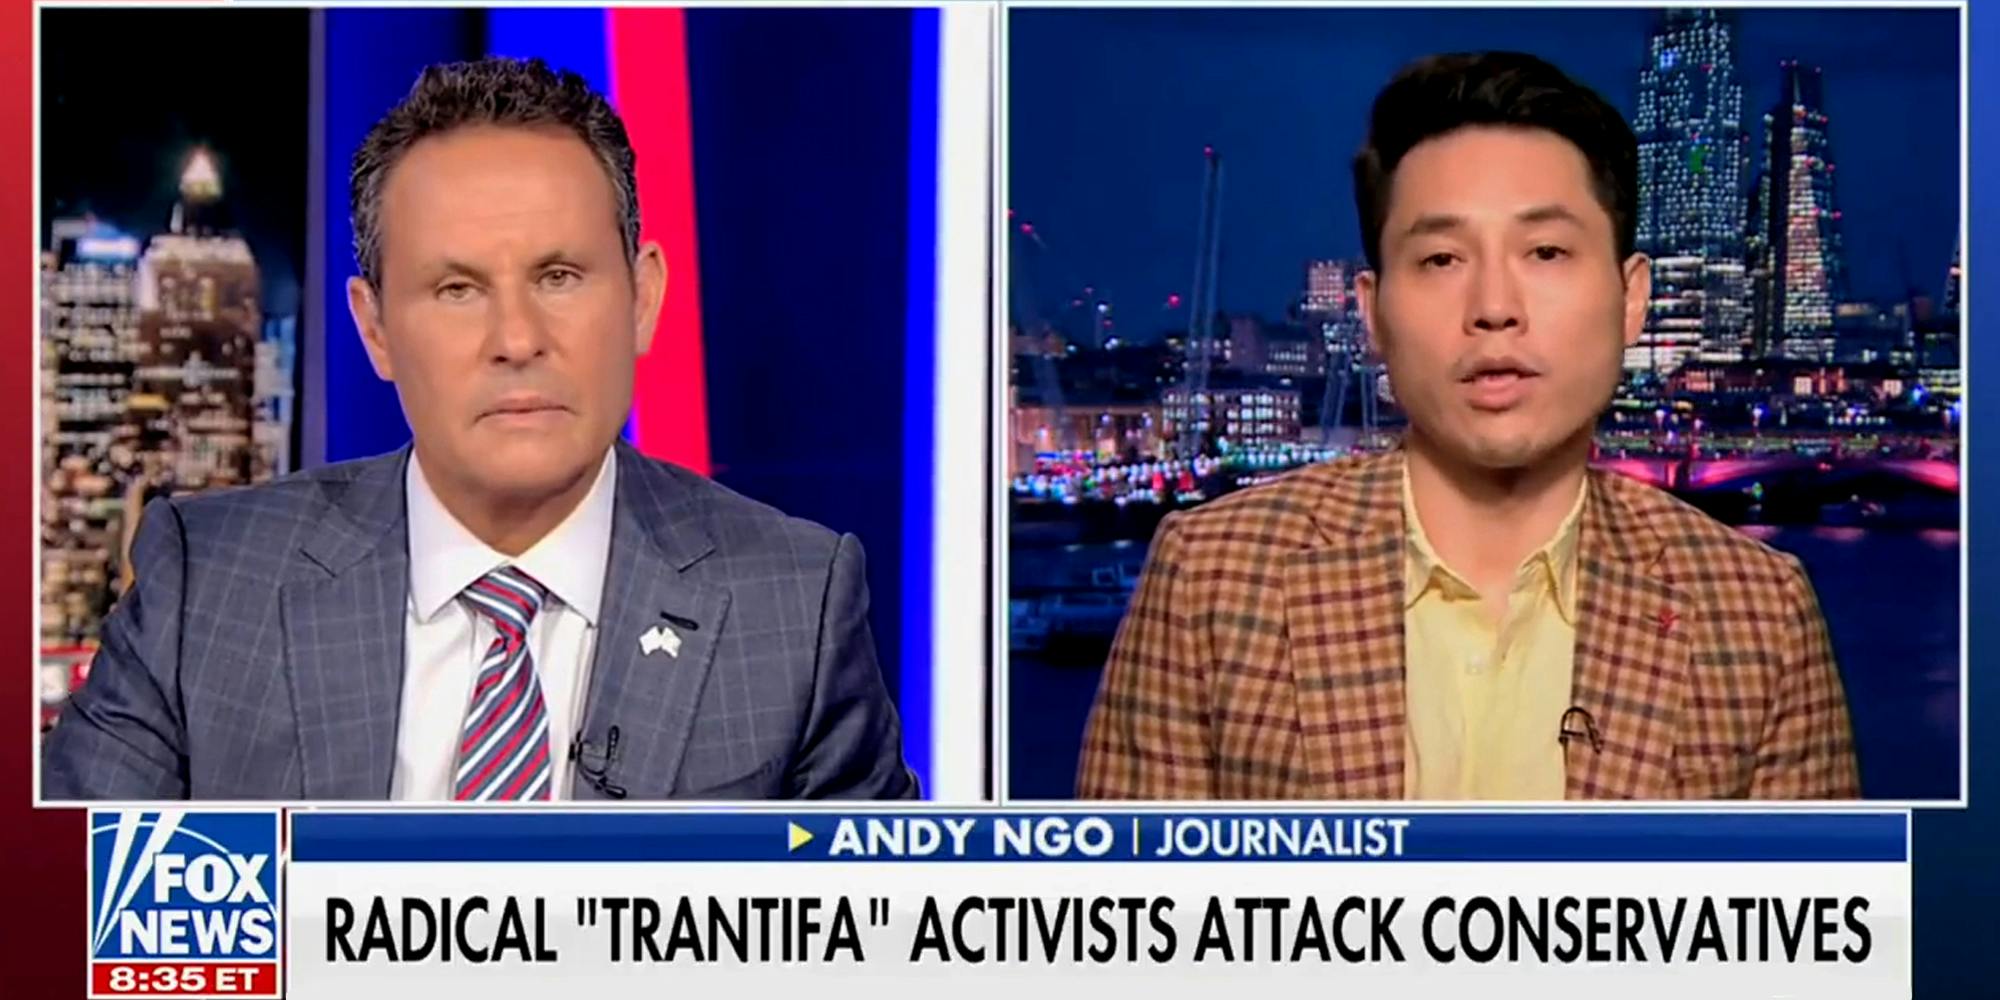 Andy Ngo on Fox News with caption "RADICAL "TRANTIFA" ACTIVISTS ATTACK CONSERVATIVES" in front of red and blue city background